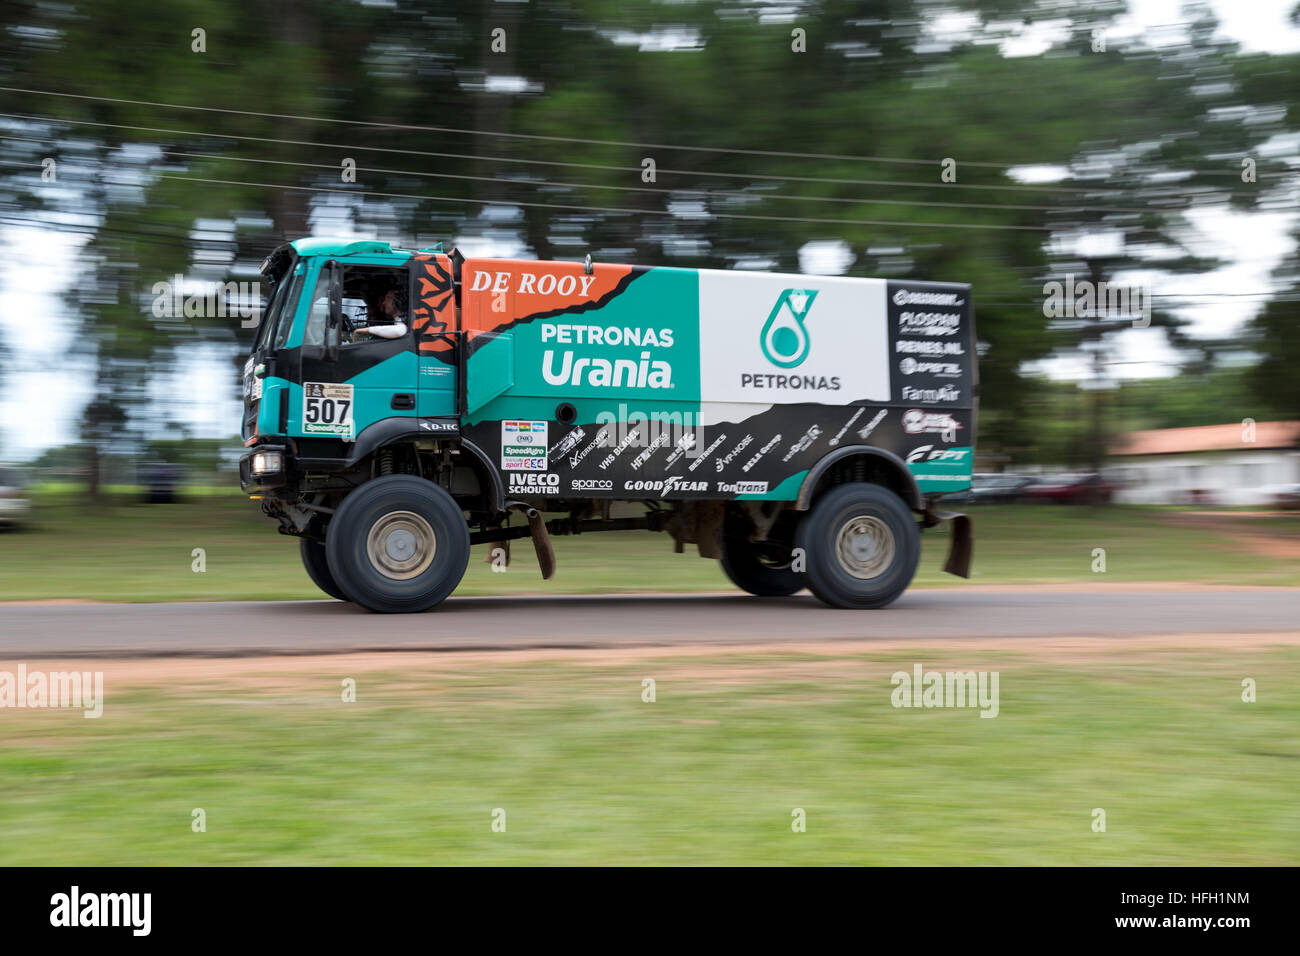 Asuncion, Paraguay. 30th December, 2016. View of #507 - Petronas Team De Rooy Iveco (driver: Ton Van Genugten) truck, seen during the technical scrutineering day at 2017 Dakar Rally waiting park, Nu Guazu airbase, Luque, Paraguay. Credit: Andre M. Chang/Alamy Live News Stock Photo